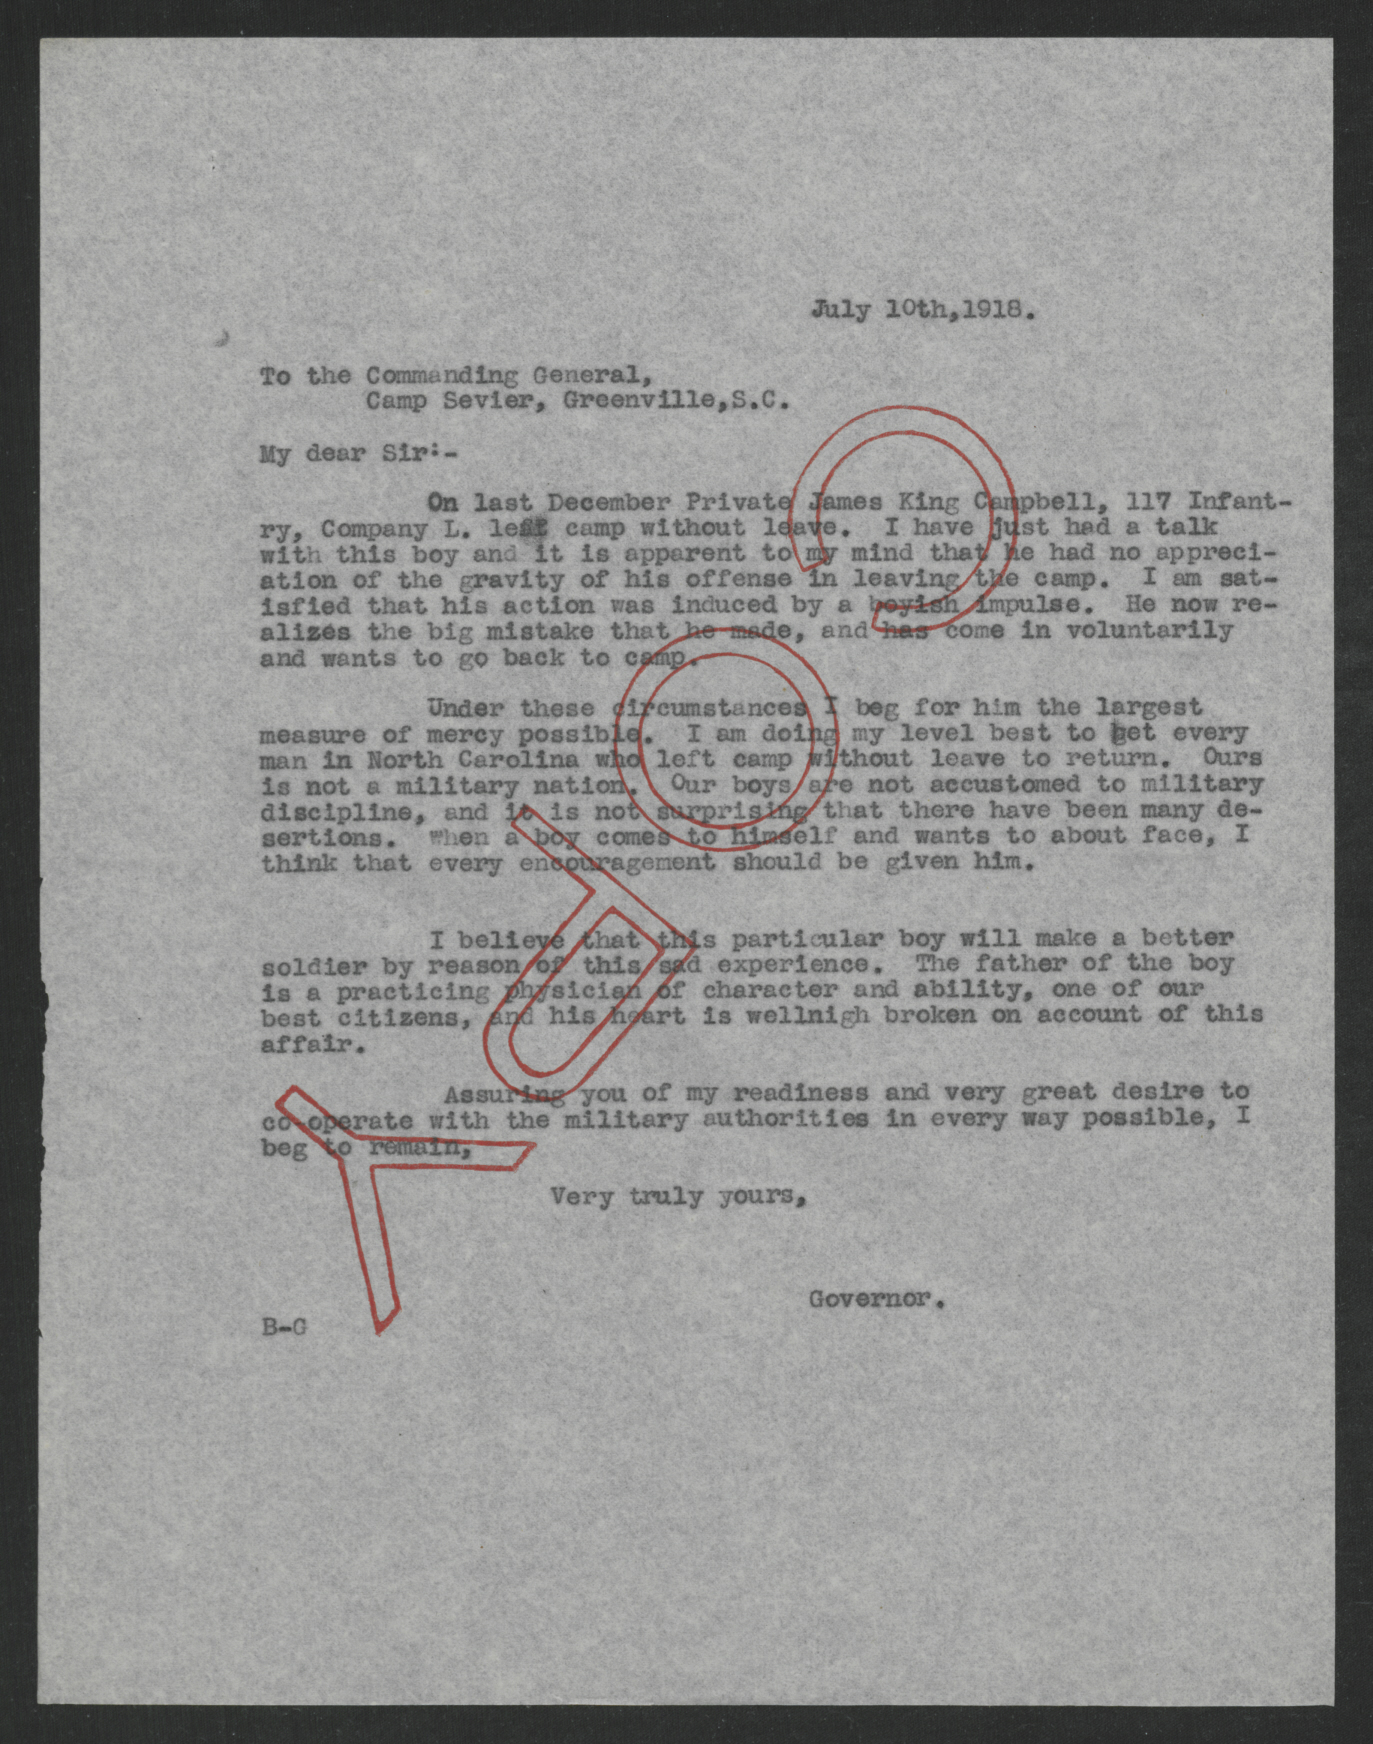 Letter from Thomas W. Bickett to the Commanding General of Camp Sevier, July 10, 1918